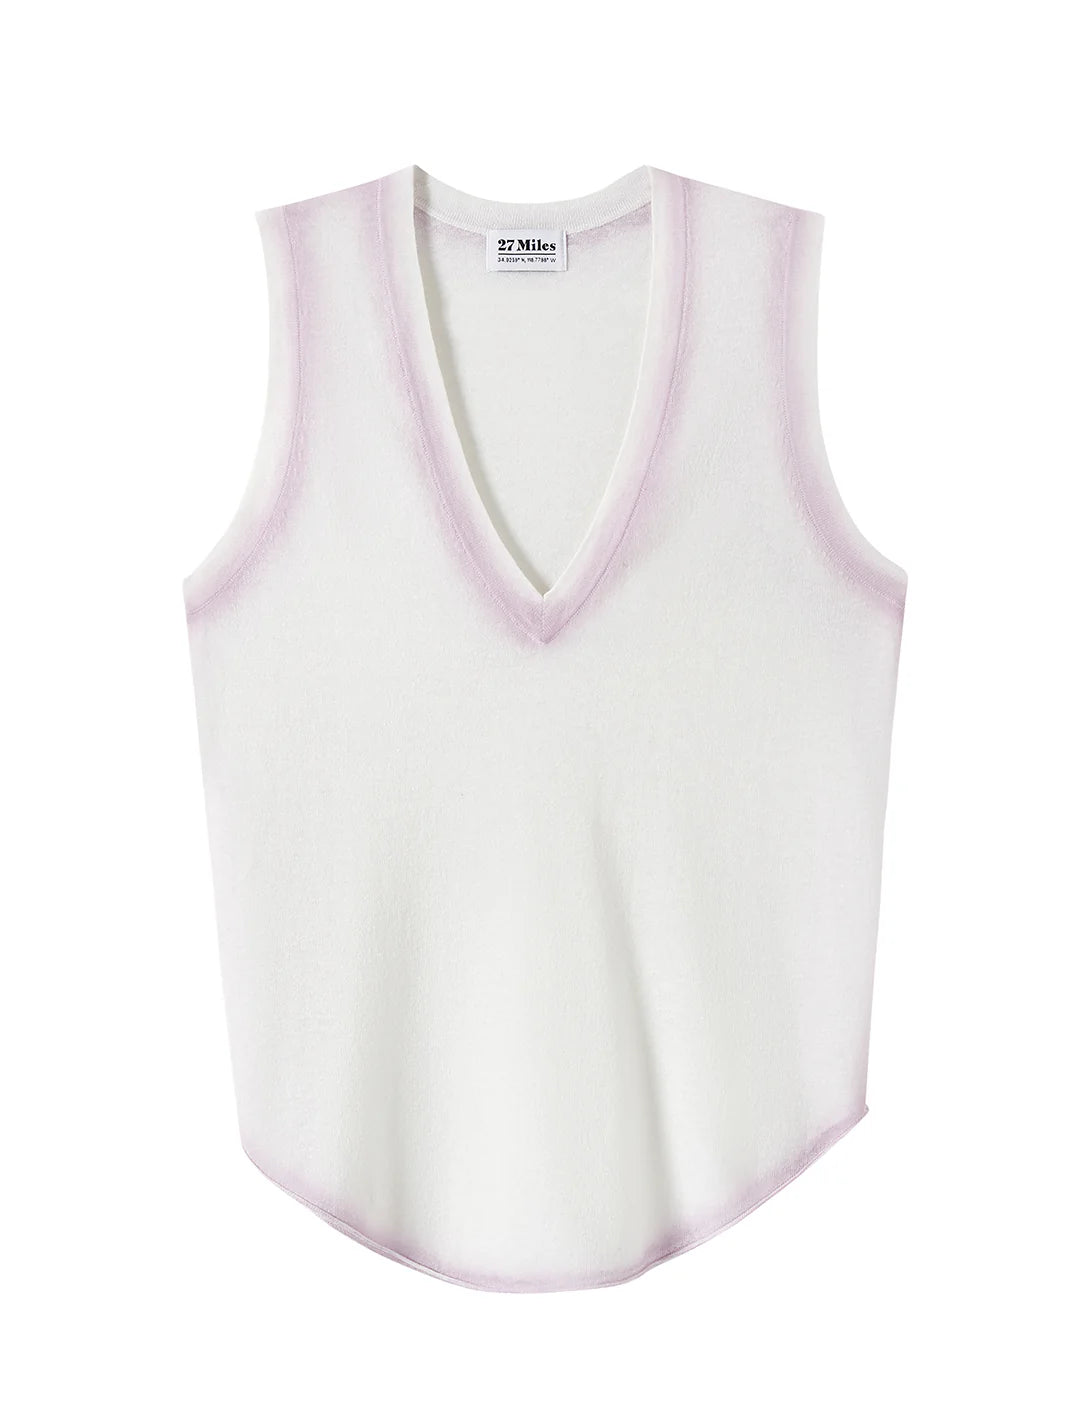 LESLIE TANK IN LILAC - Romi Boutique